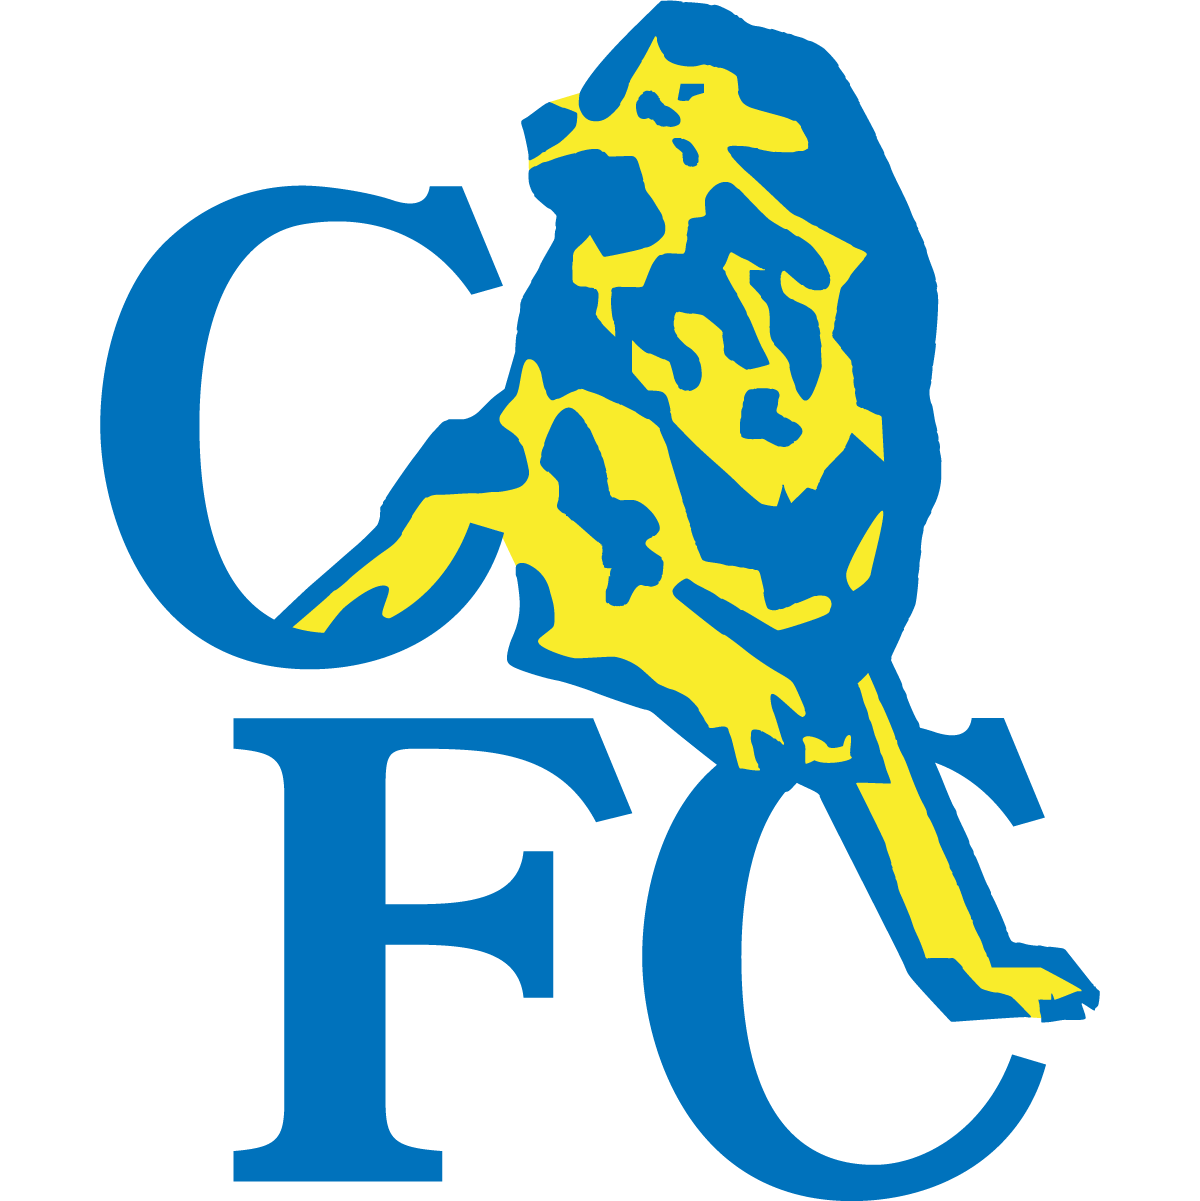 Image   Chelsea Fc Logo (Blue And Yellow).png | Logopedia | Fandom Powered By Wikia - Chelsea, Transparent background PNG HD thumbnail